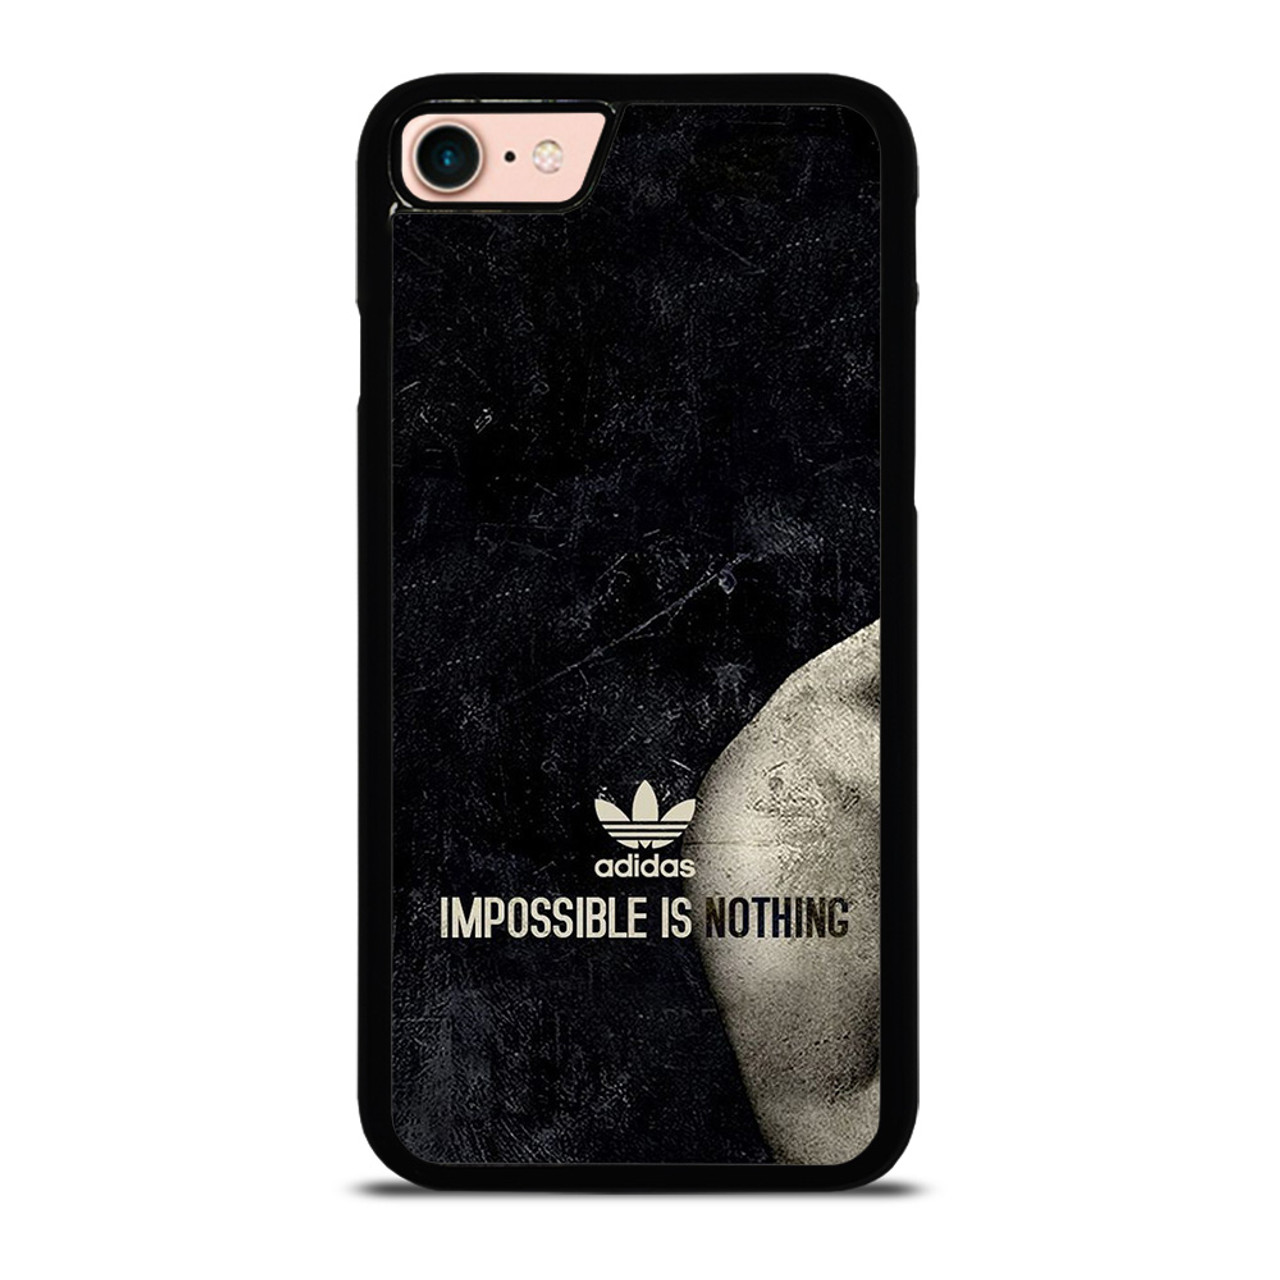 ADIDAS IS NOTHING Case Cover